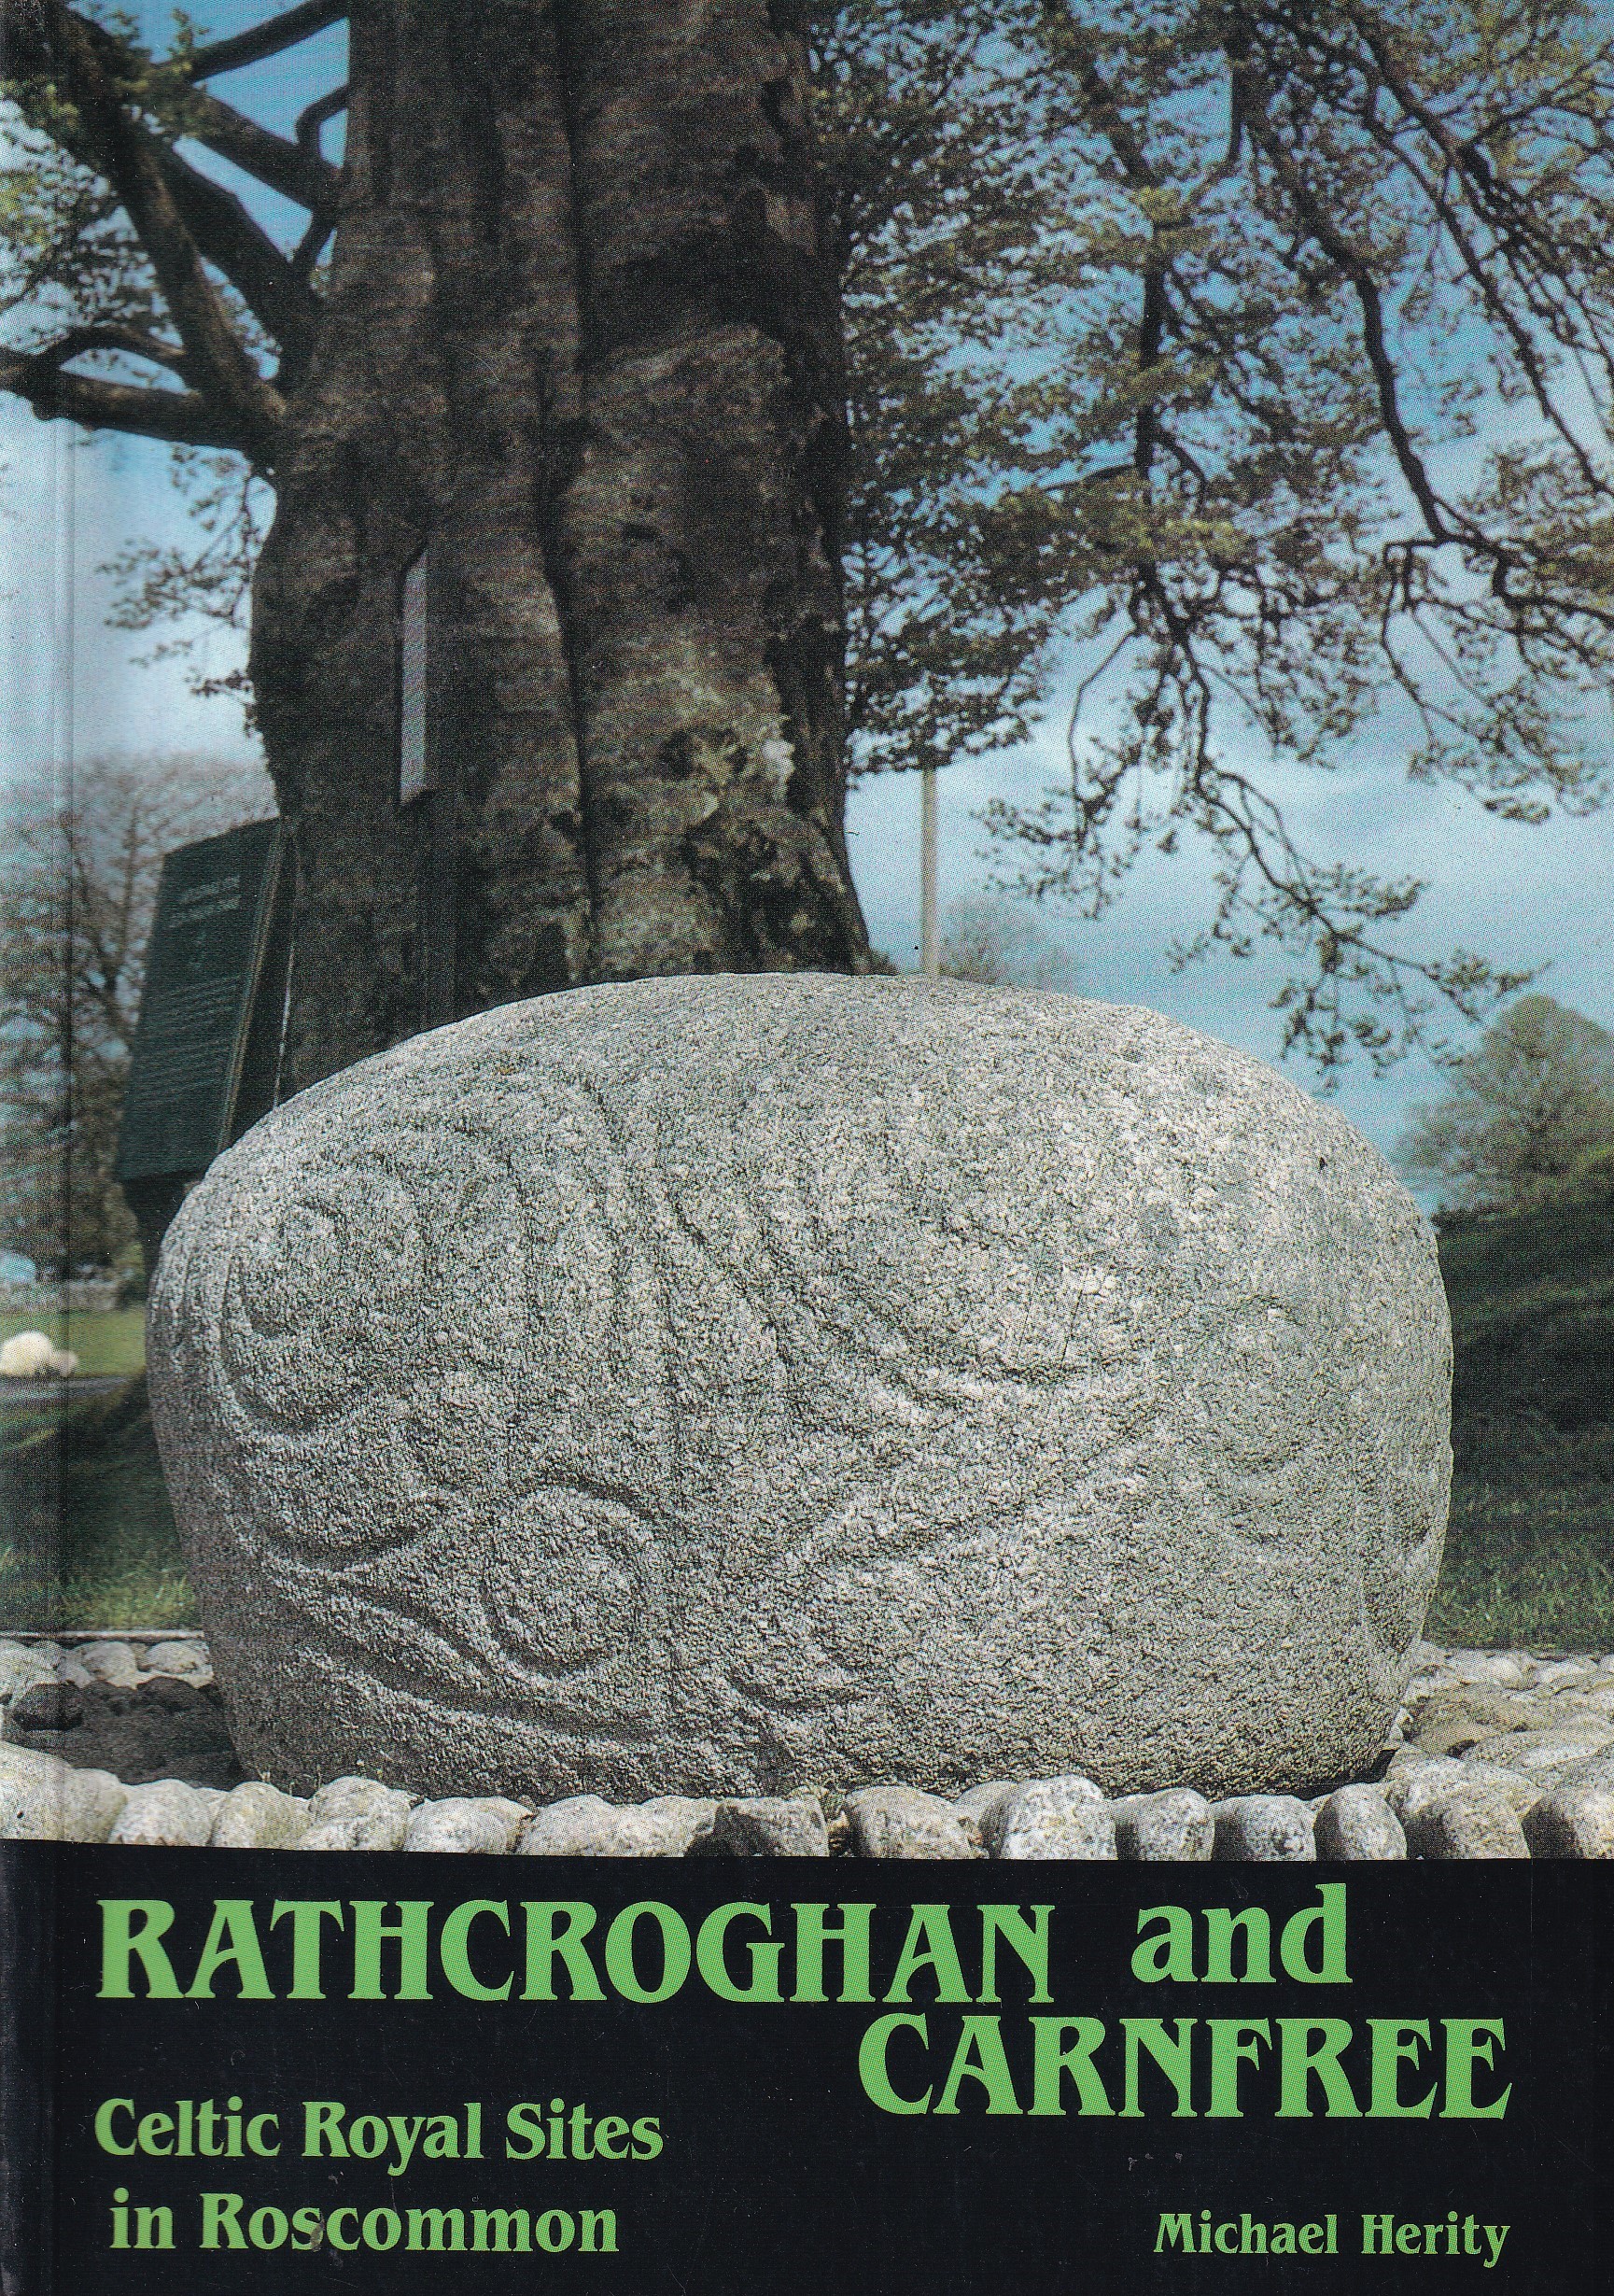 Rathcroghan and Carnfree: Celtic Royal Sites in Roscommon by Michael Herity